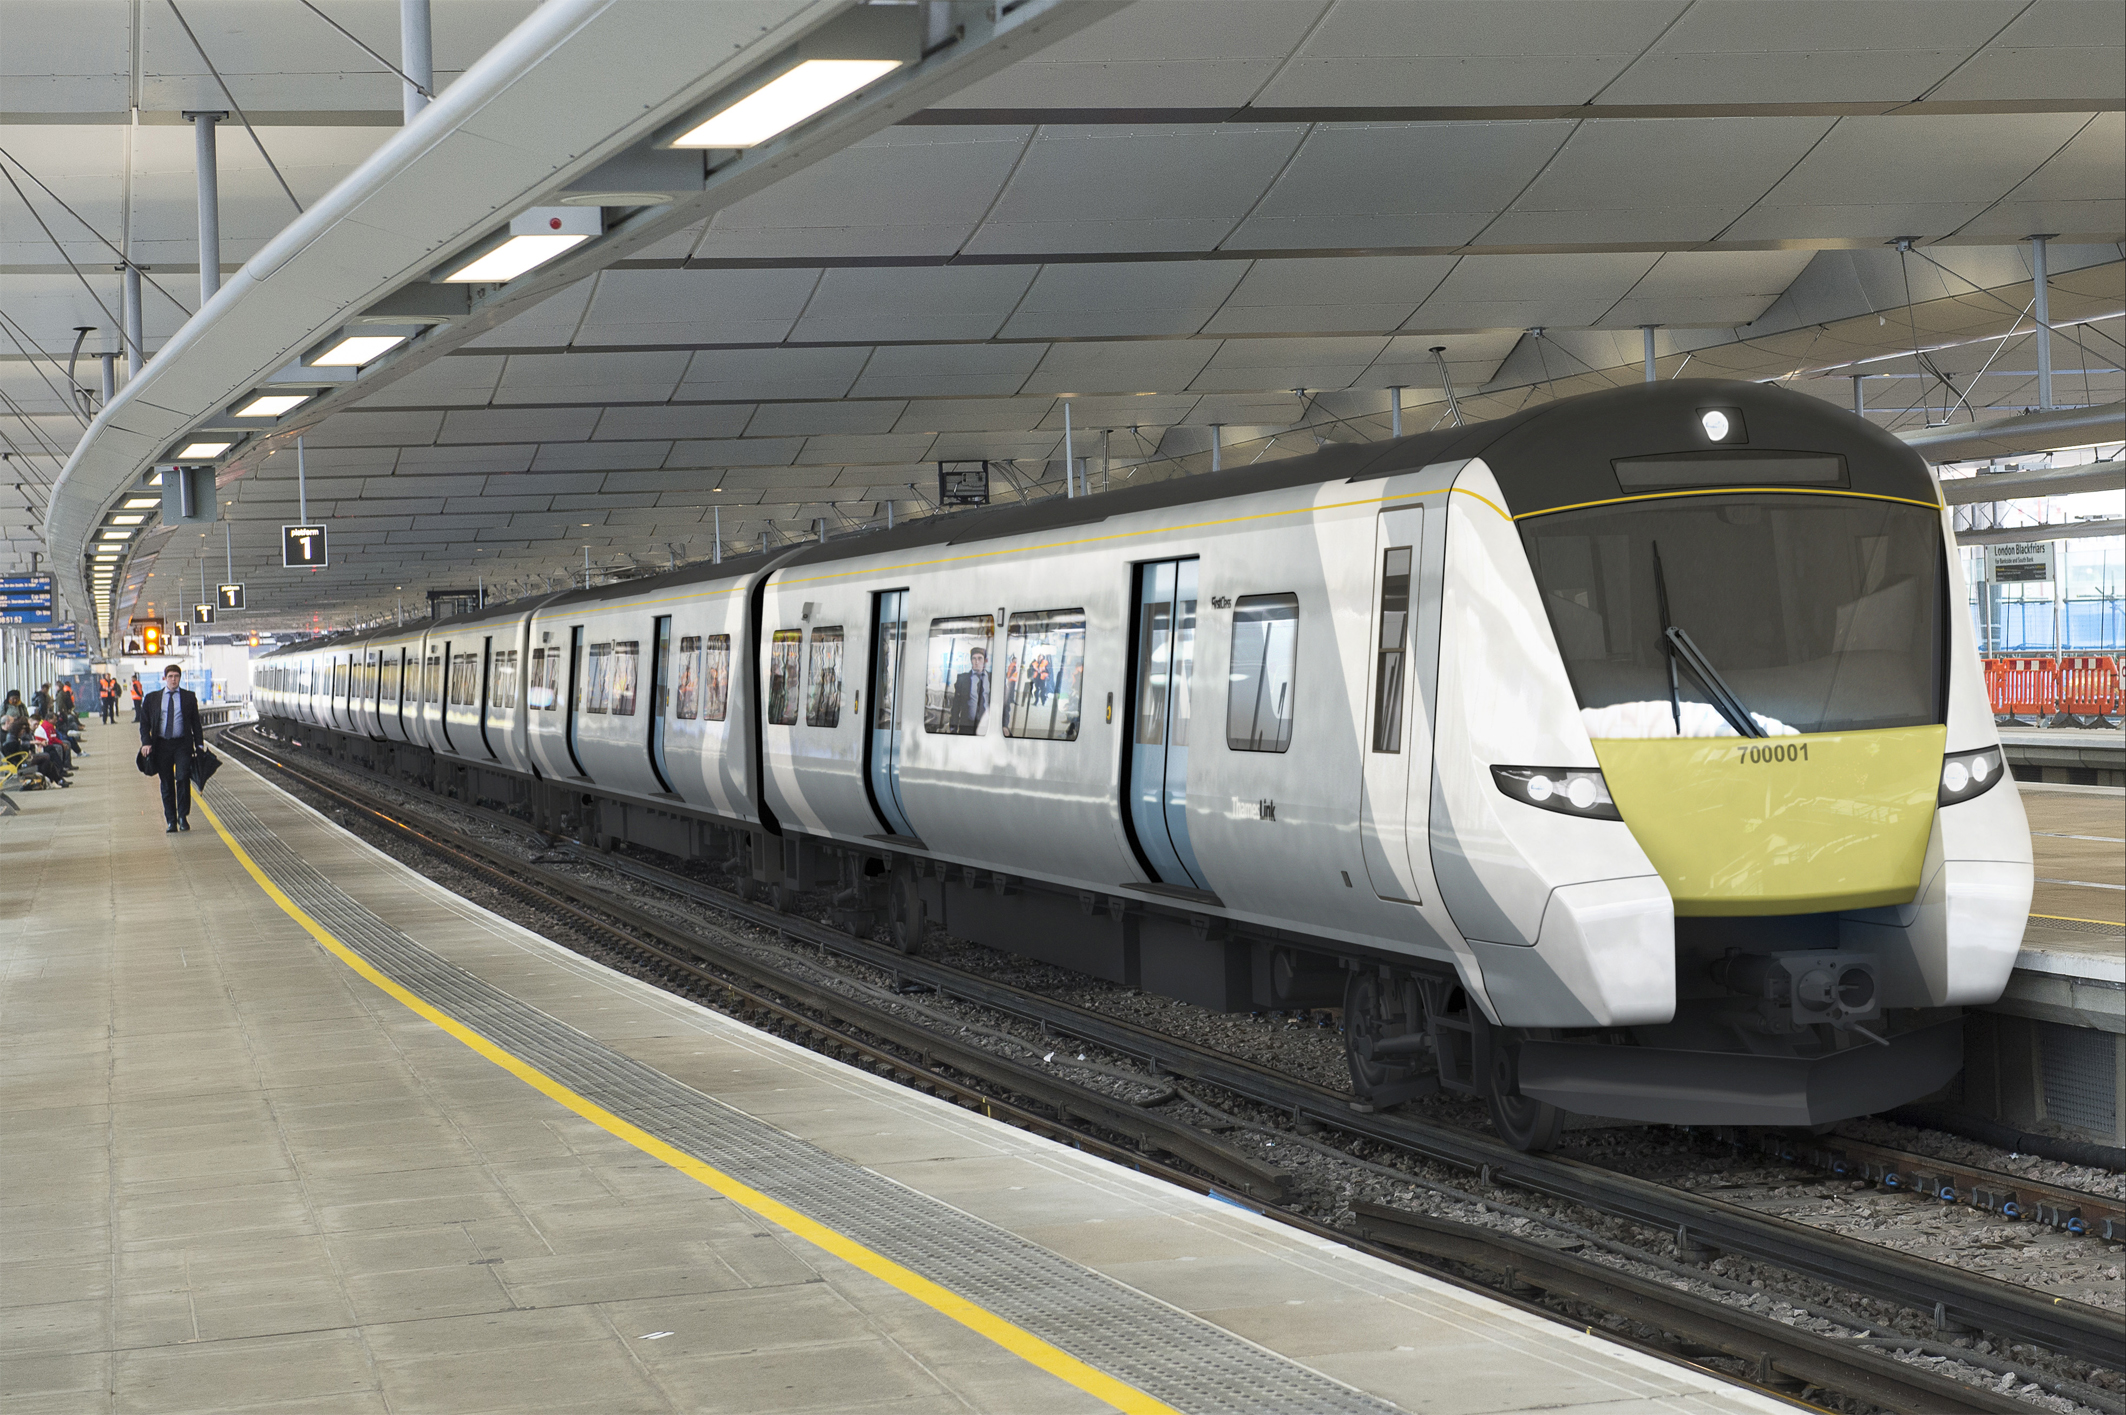 The new Class 700 in its livery